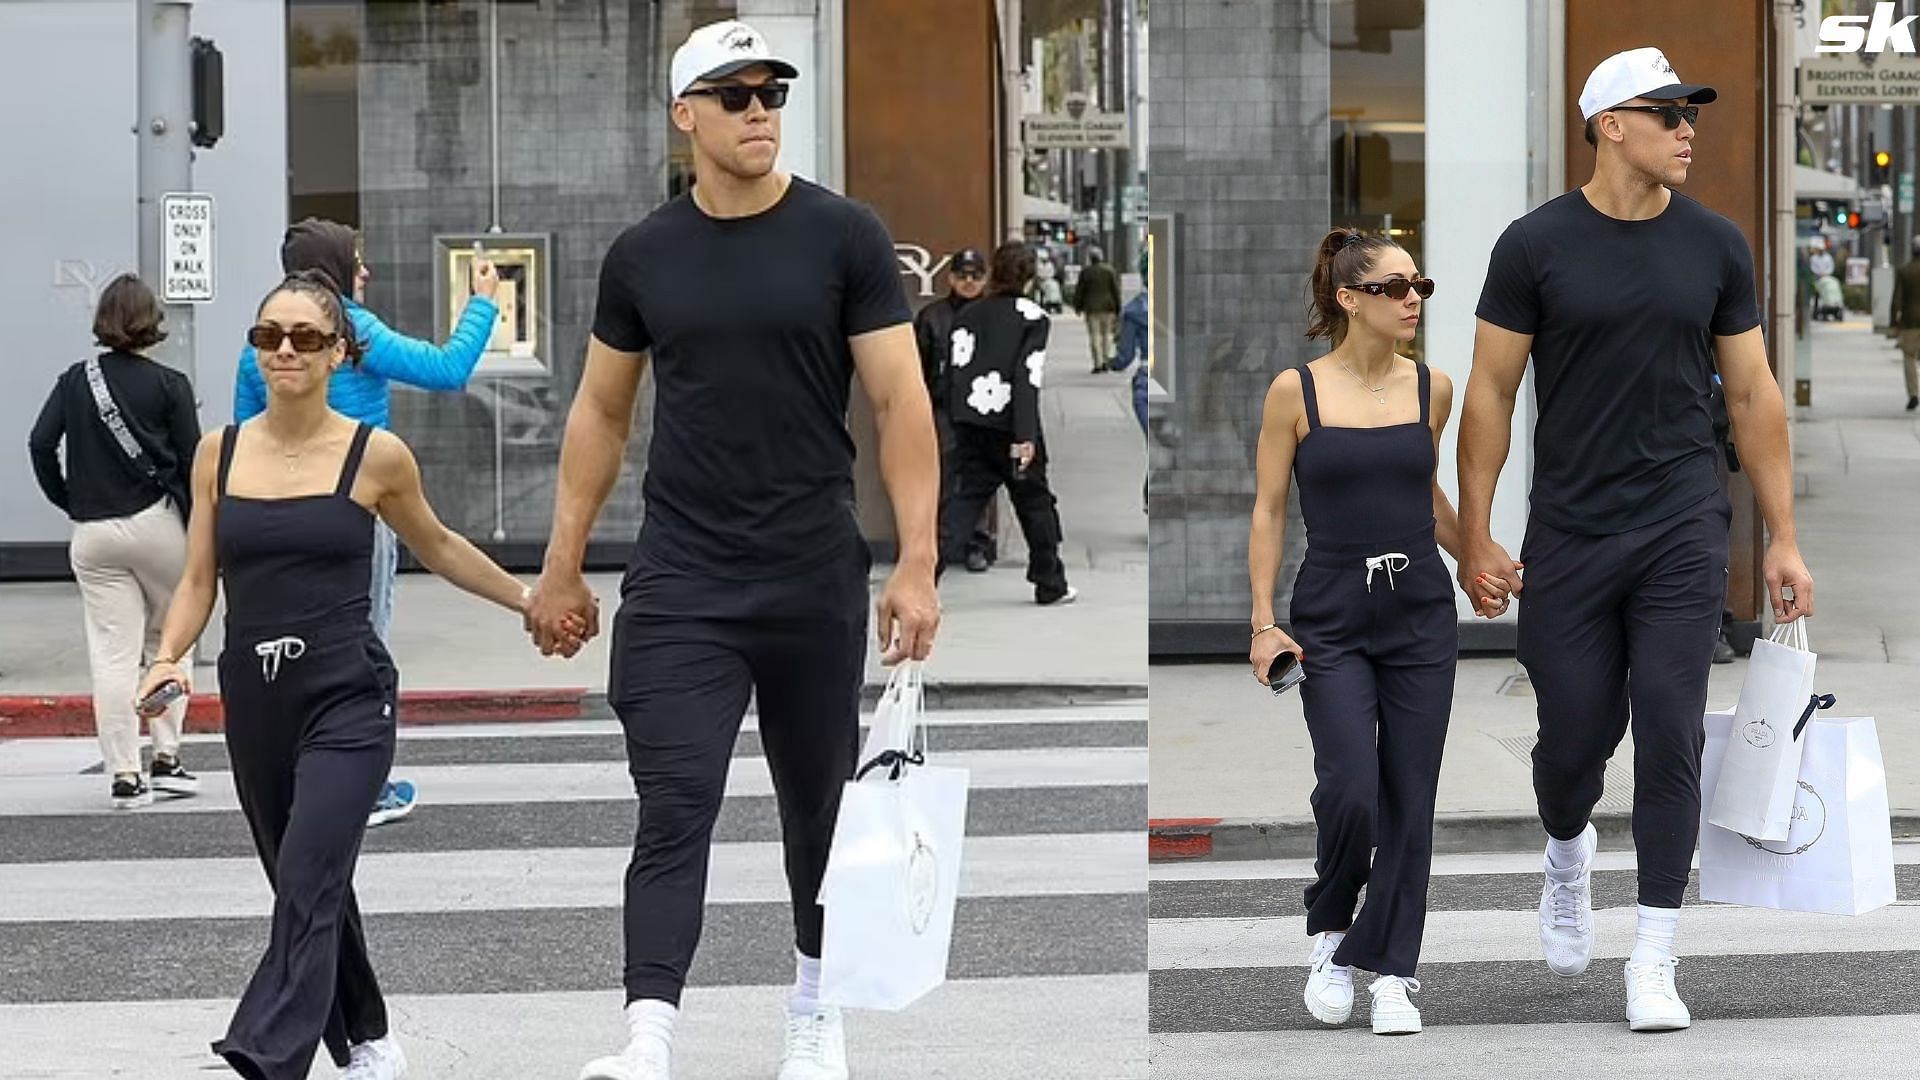 New Yrok Yankees captain Aaron Judge and wife Samantha Judge shopping in Rodeo Drive